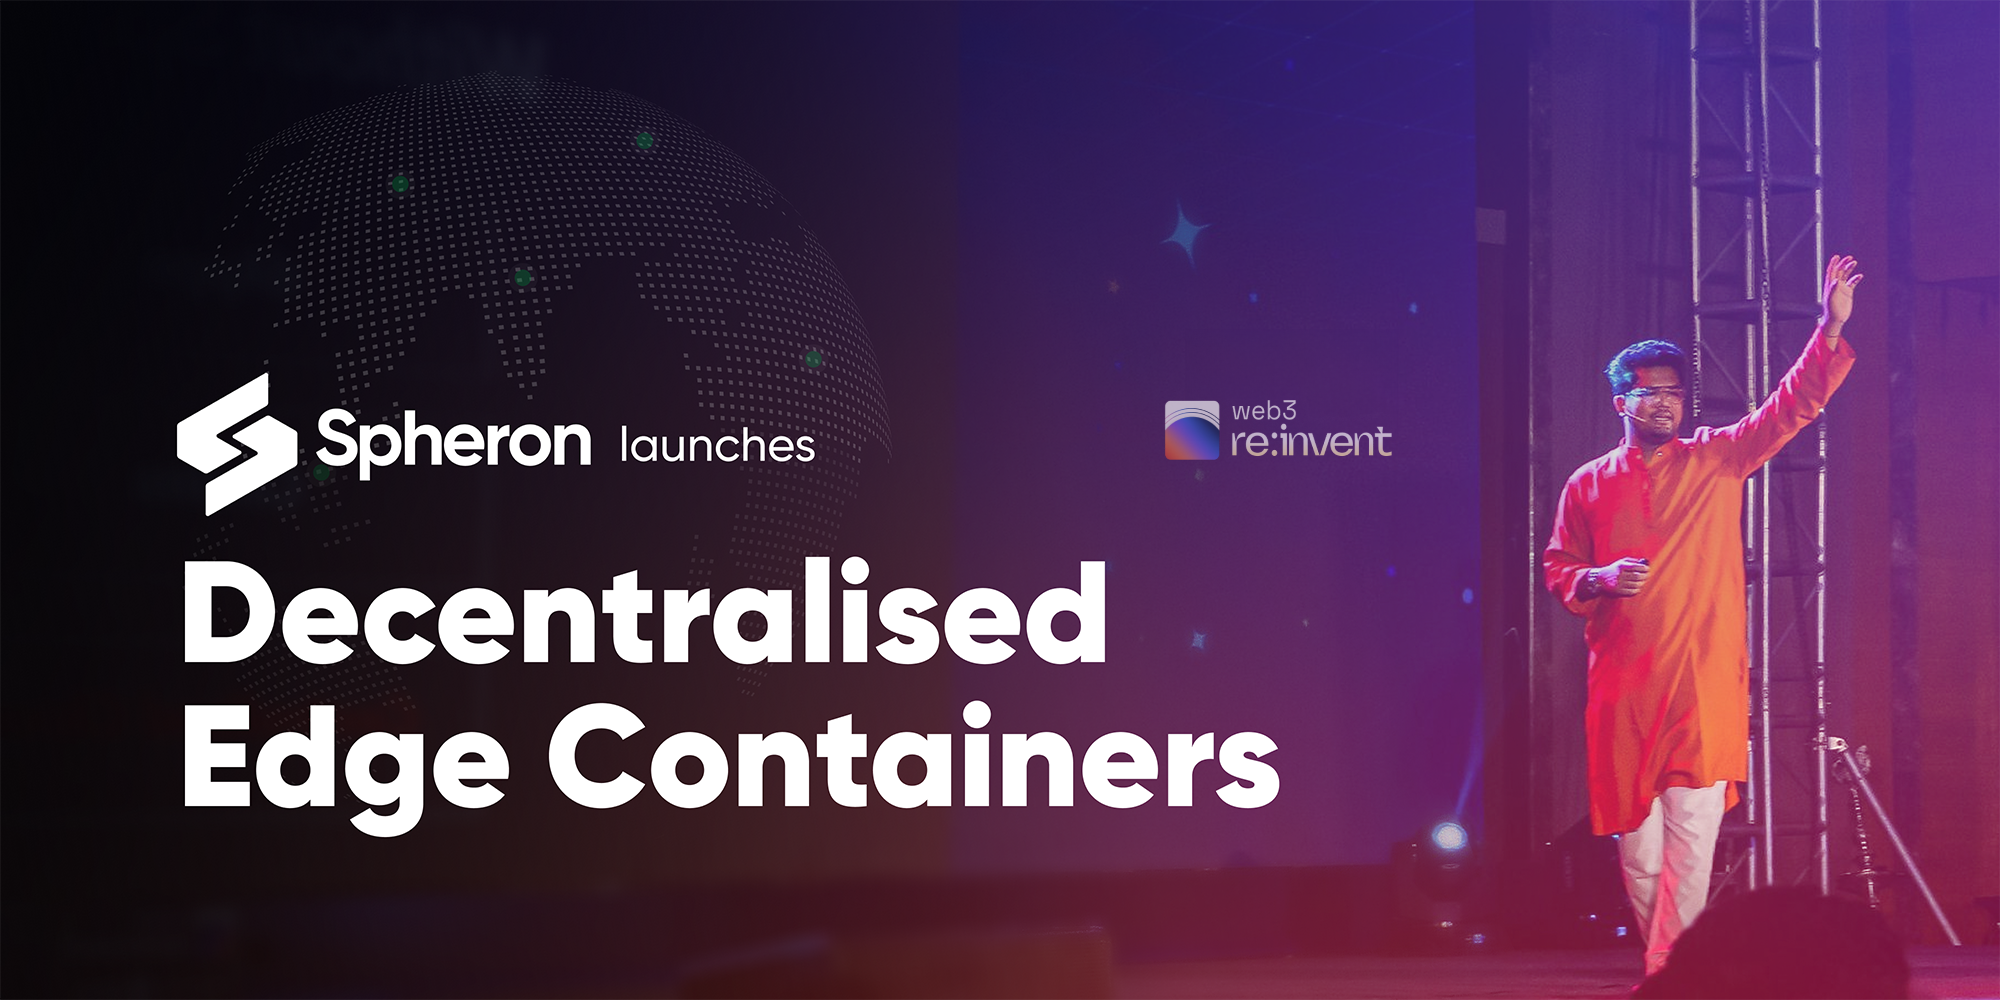 Spheron Network launches groundbreaking Edge Containers at Web3 re:invent, redefining the future of Web3 infrastructure